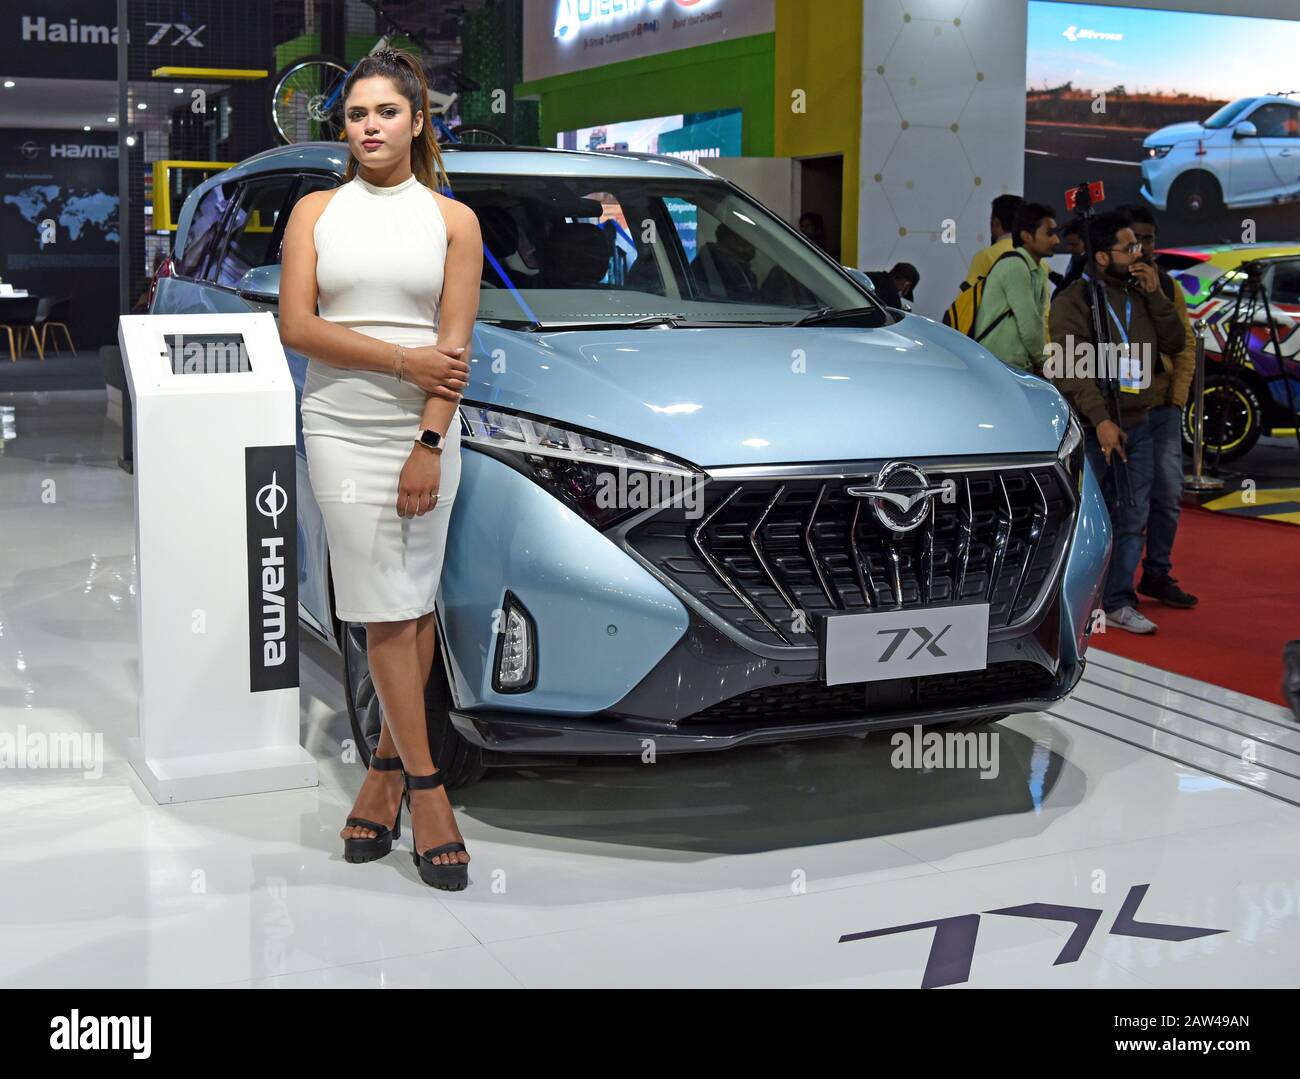 Noida, Delhi, India. 6th Feb, 2020. A model poses next to a Haima 7X displayed at the Auto Expo 2020 in Greater Noida Credit: Ganesh Chandra/SOPA Images/ZUMA Wire/Alamy Live News Stock Photo